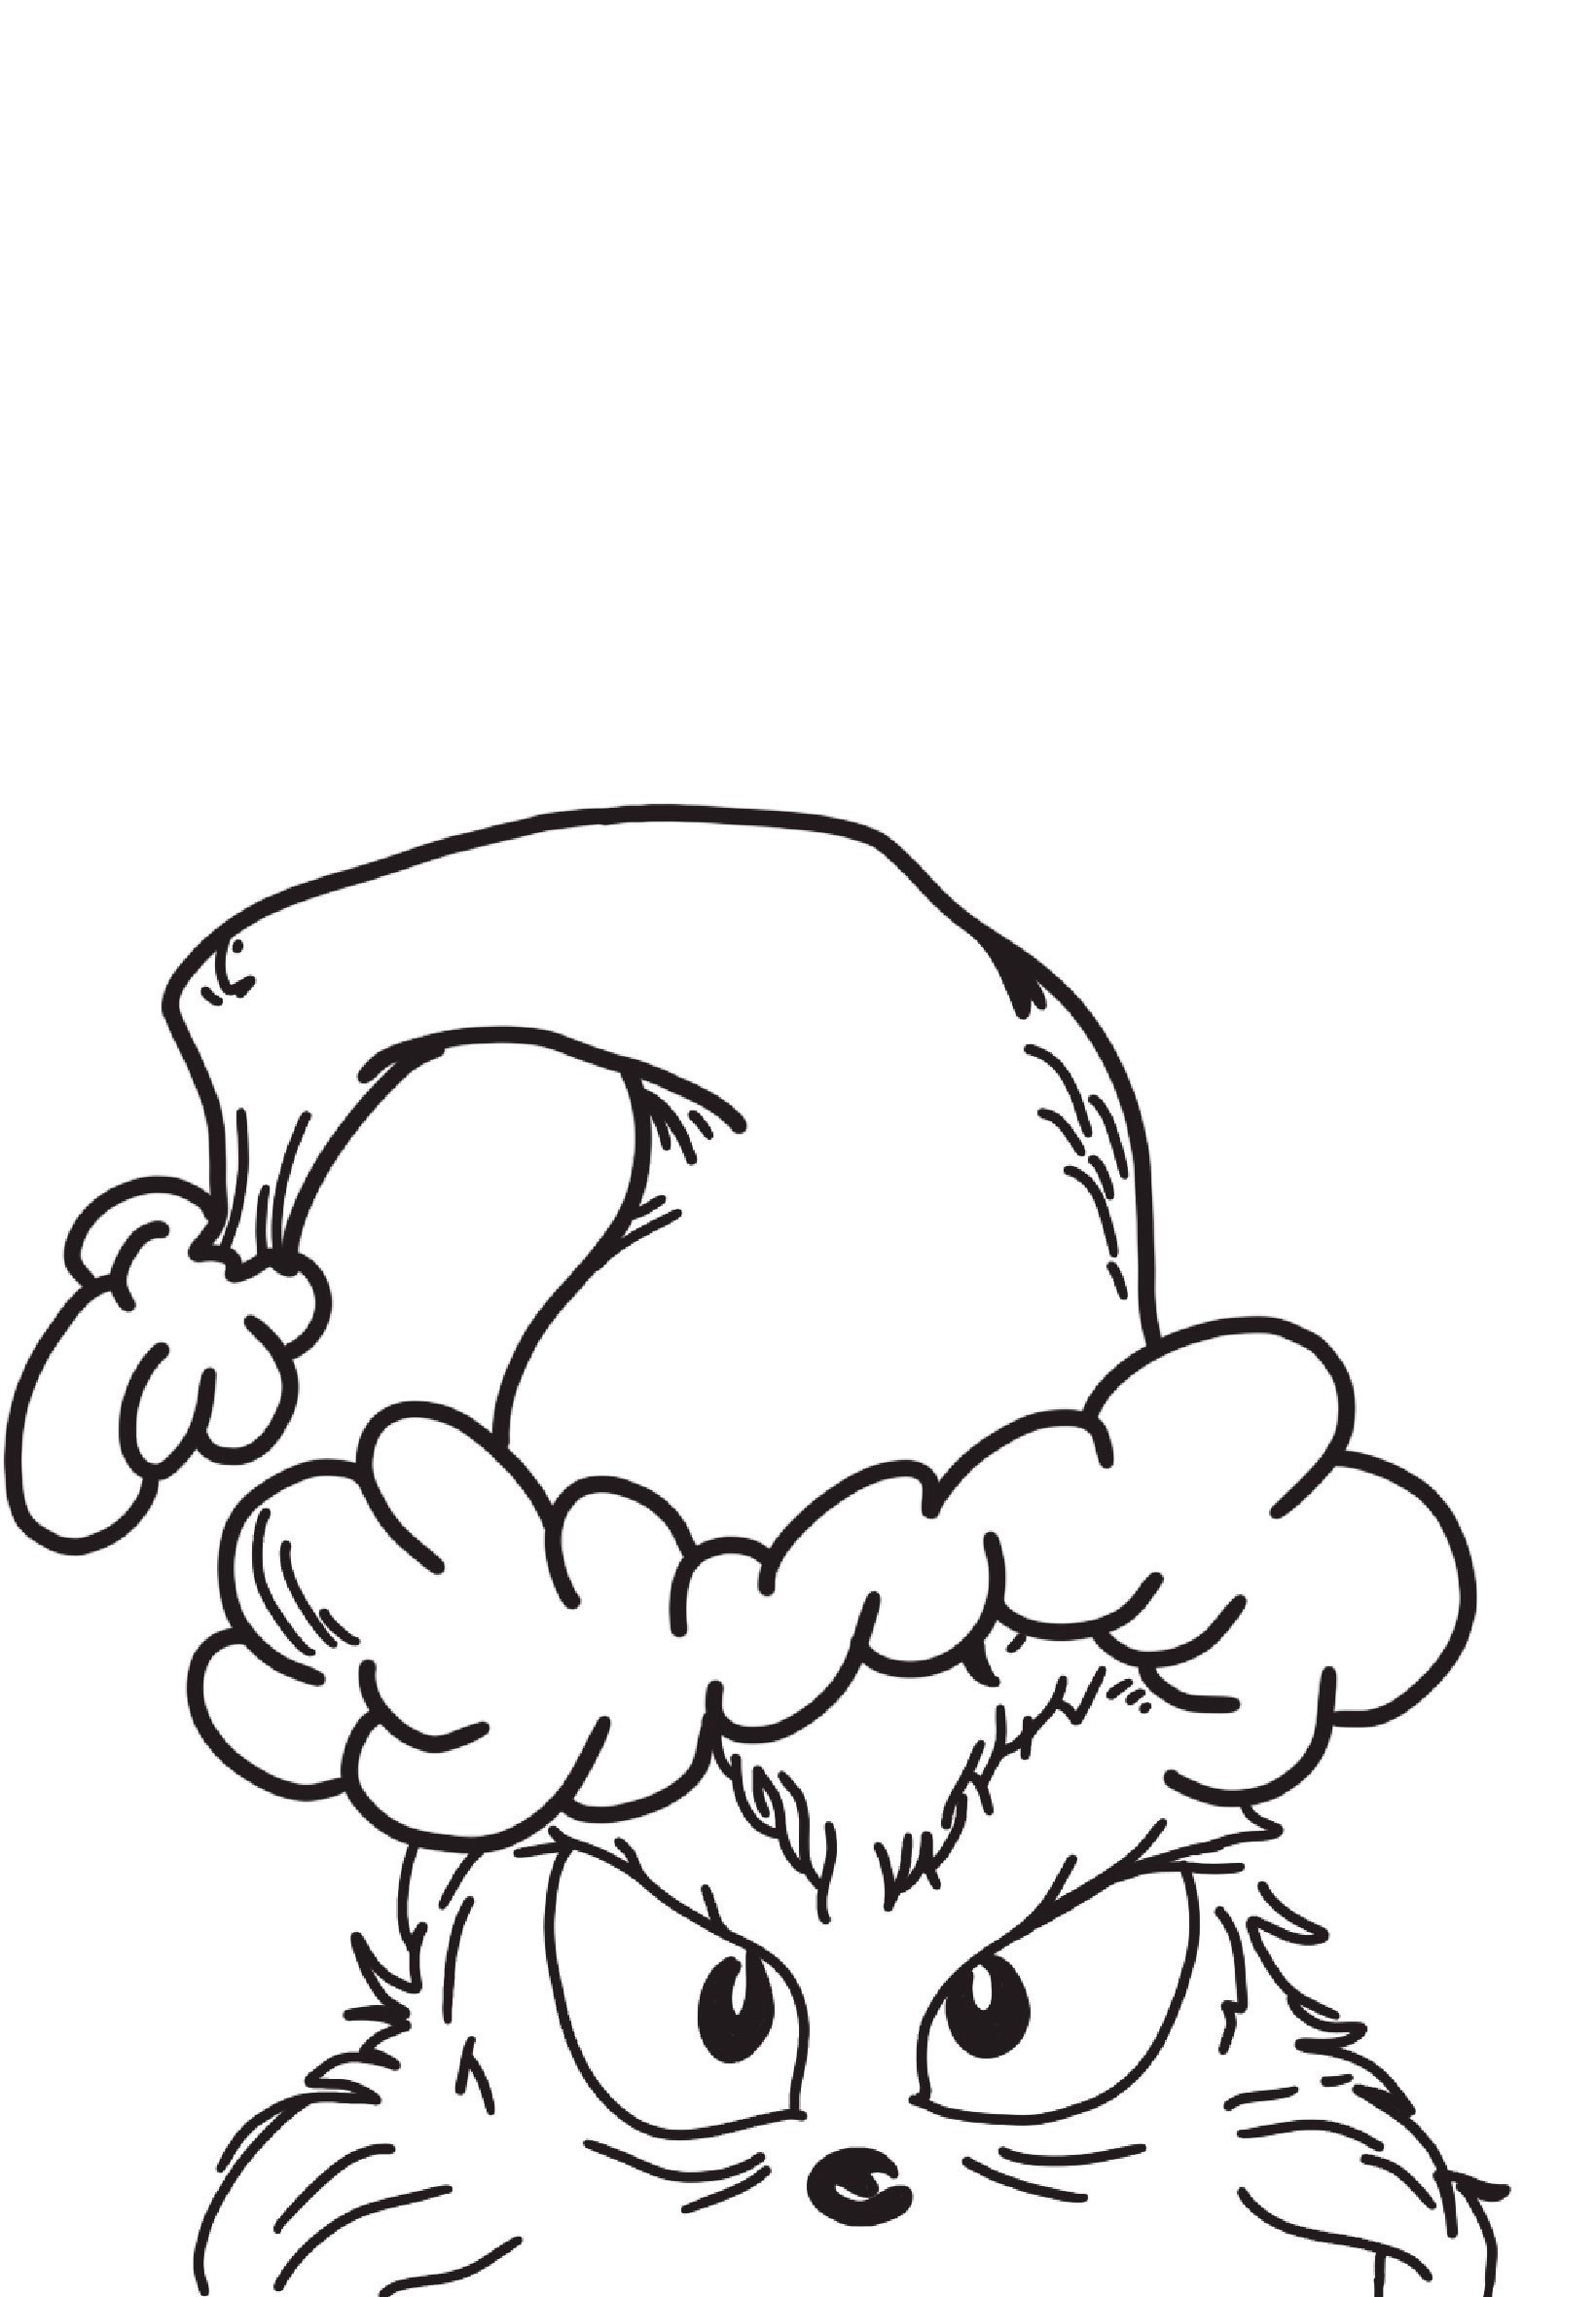 Grinch printable coloring pages pages